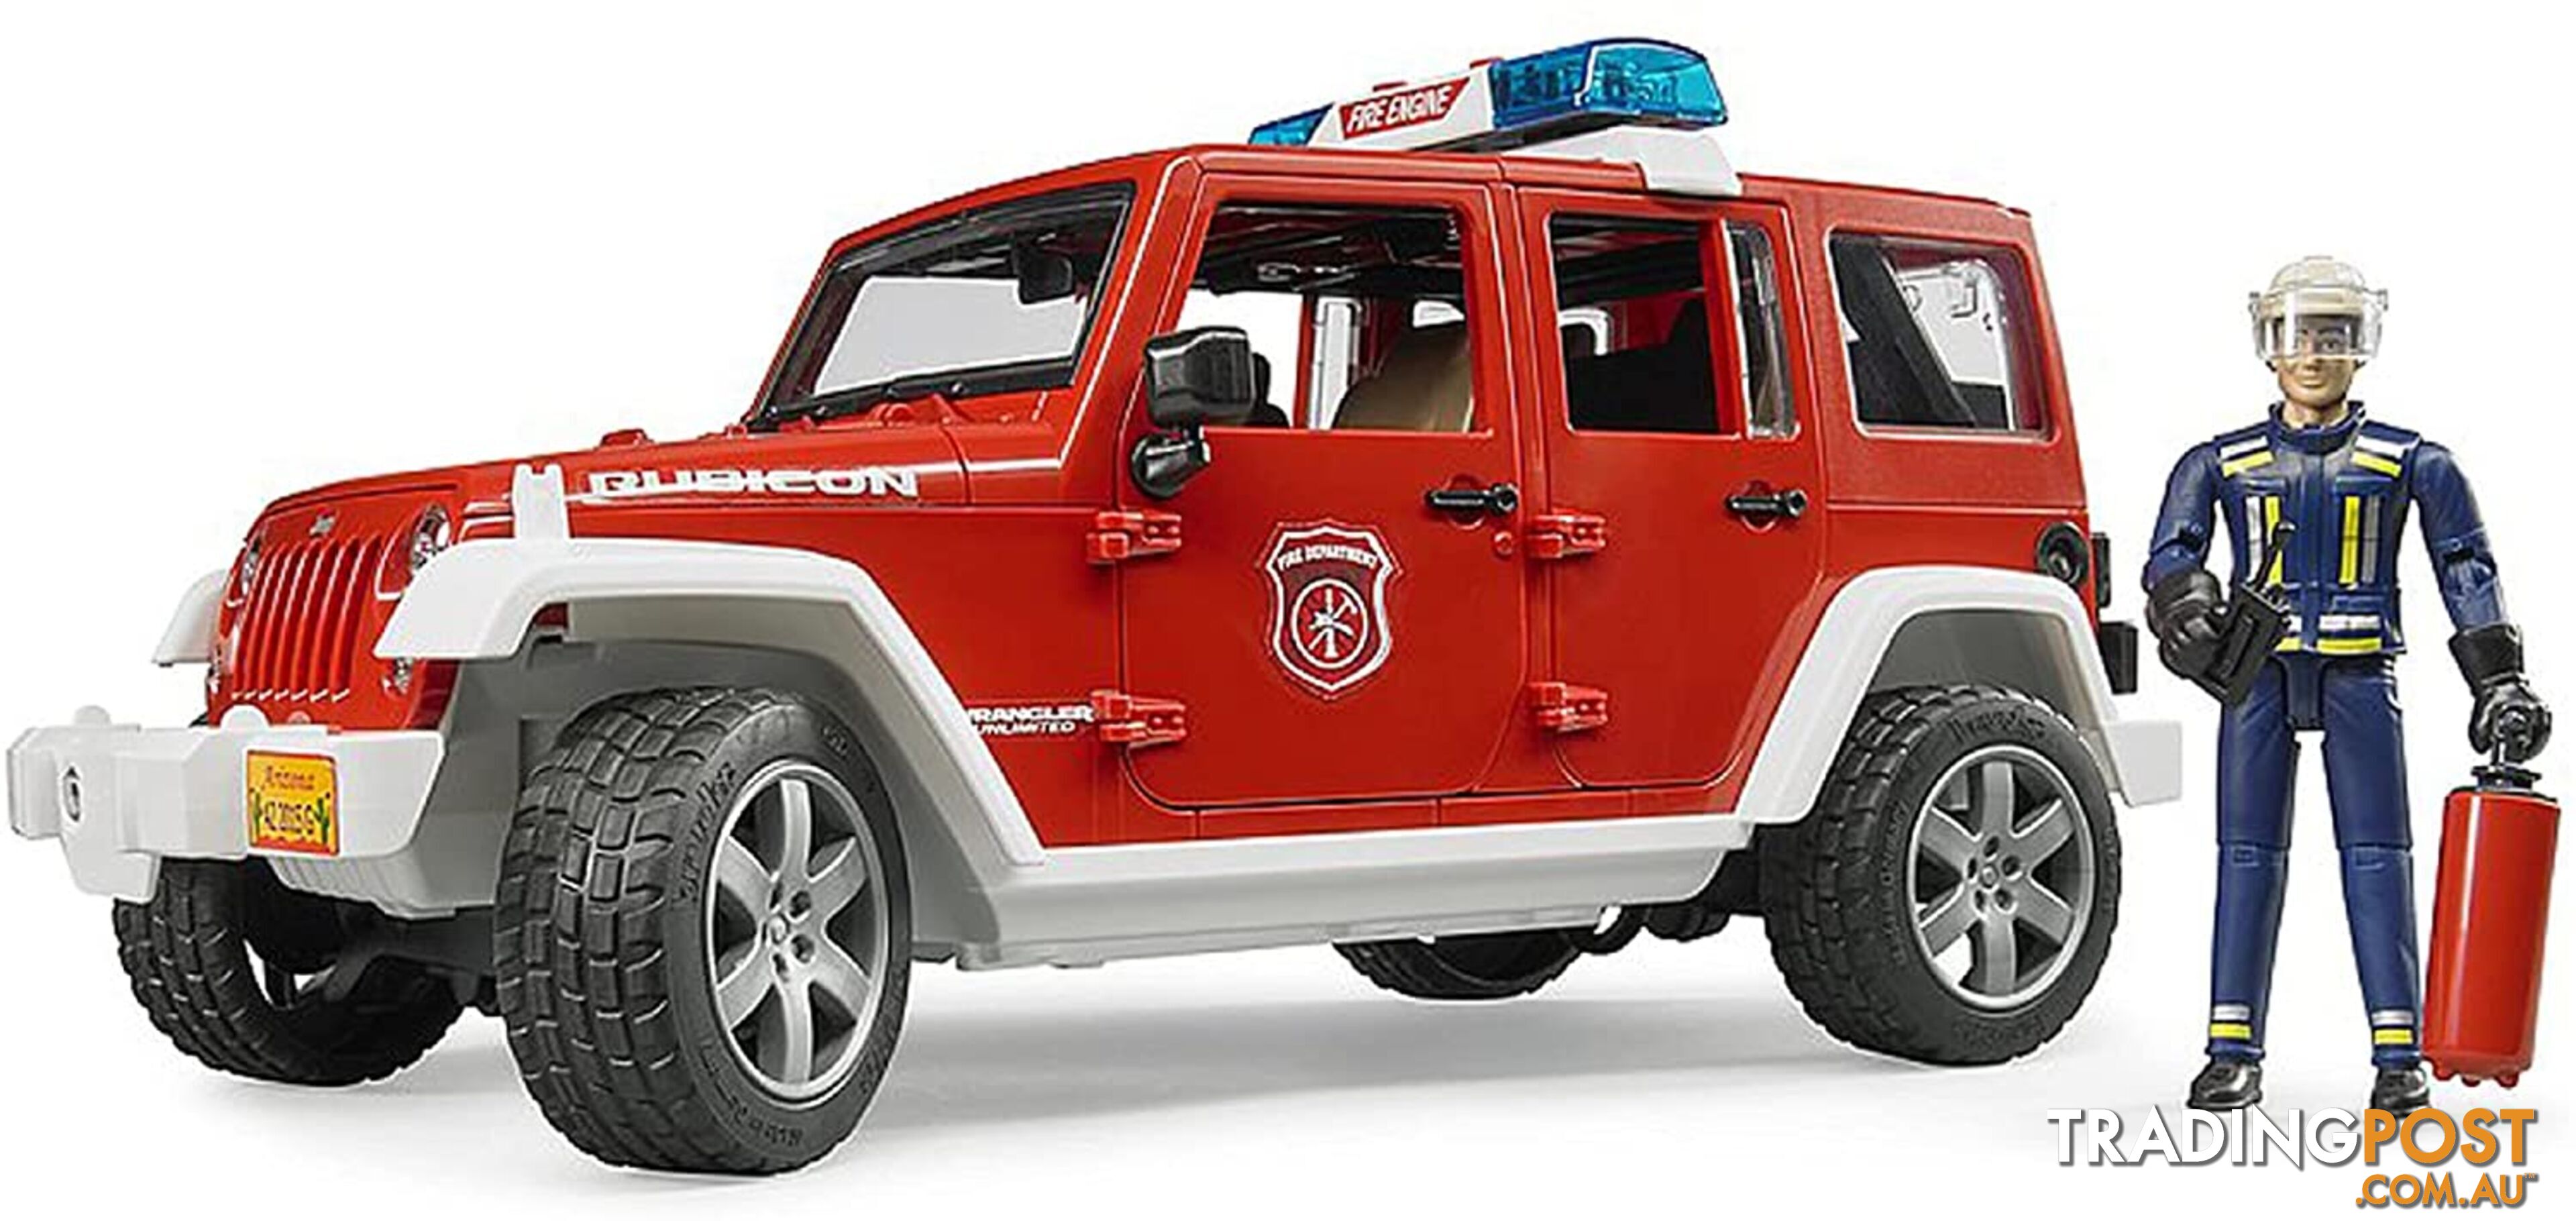 Bruder Jeep Rubicon Fire Rescue Vehicle With Lights & Engine Sounds Including Fireman Figure Zi24002528 - 4001702025281